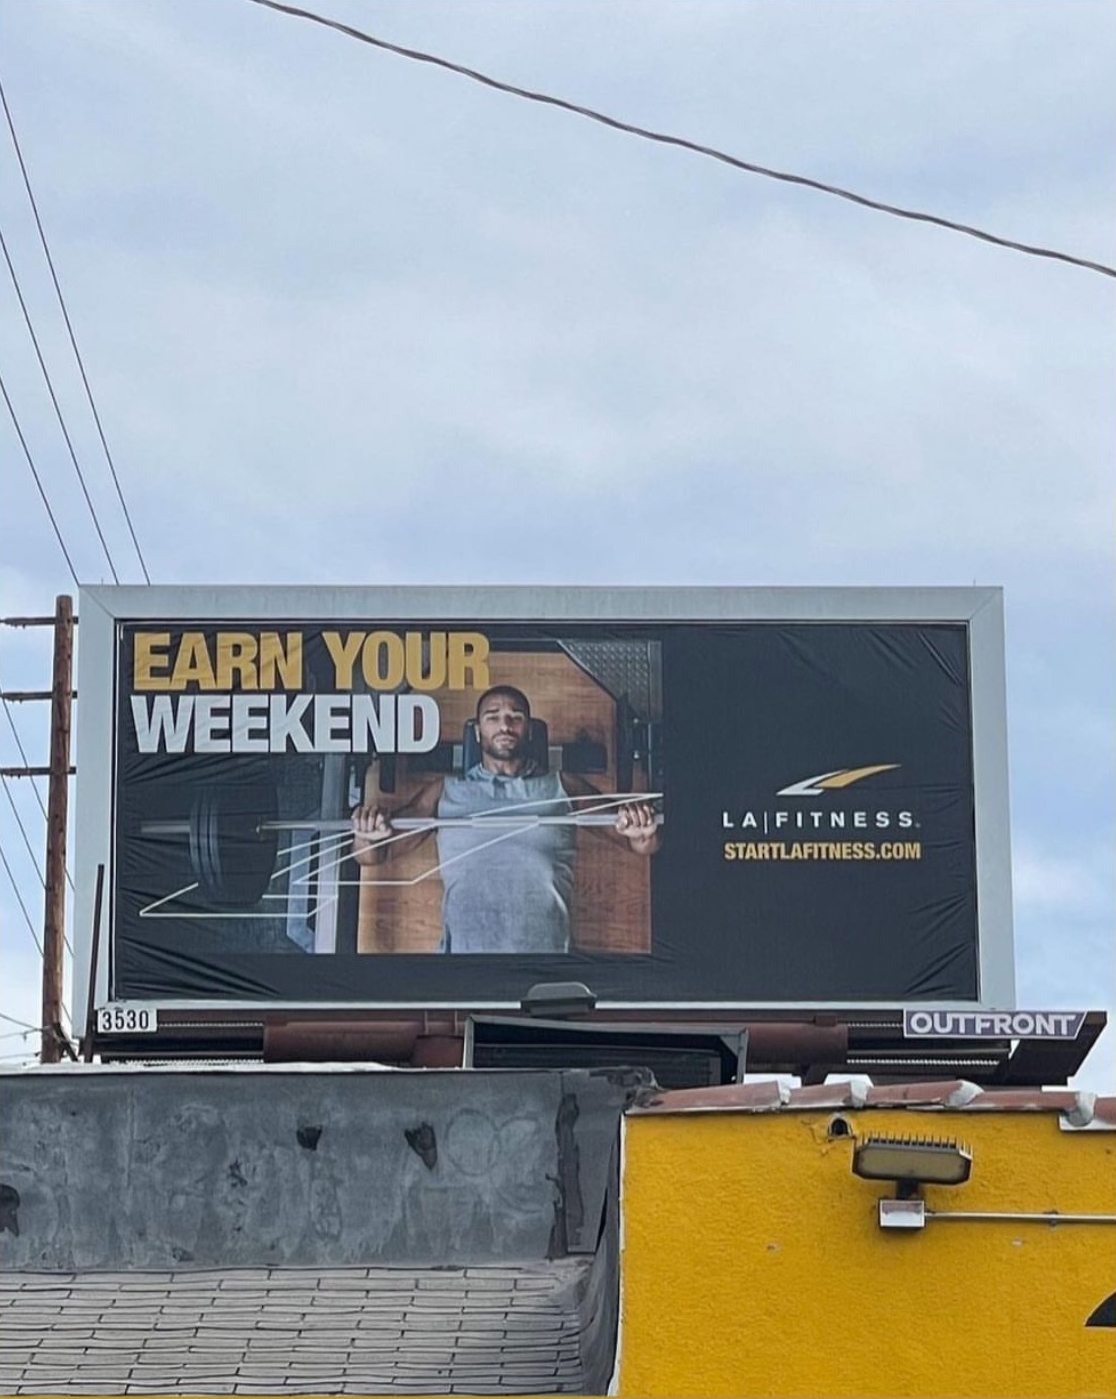 LA Fitness Billboard featuring an image by Caleb Kuhl of an african american man with a focused expression preparing to bench press weights in a gym